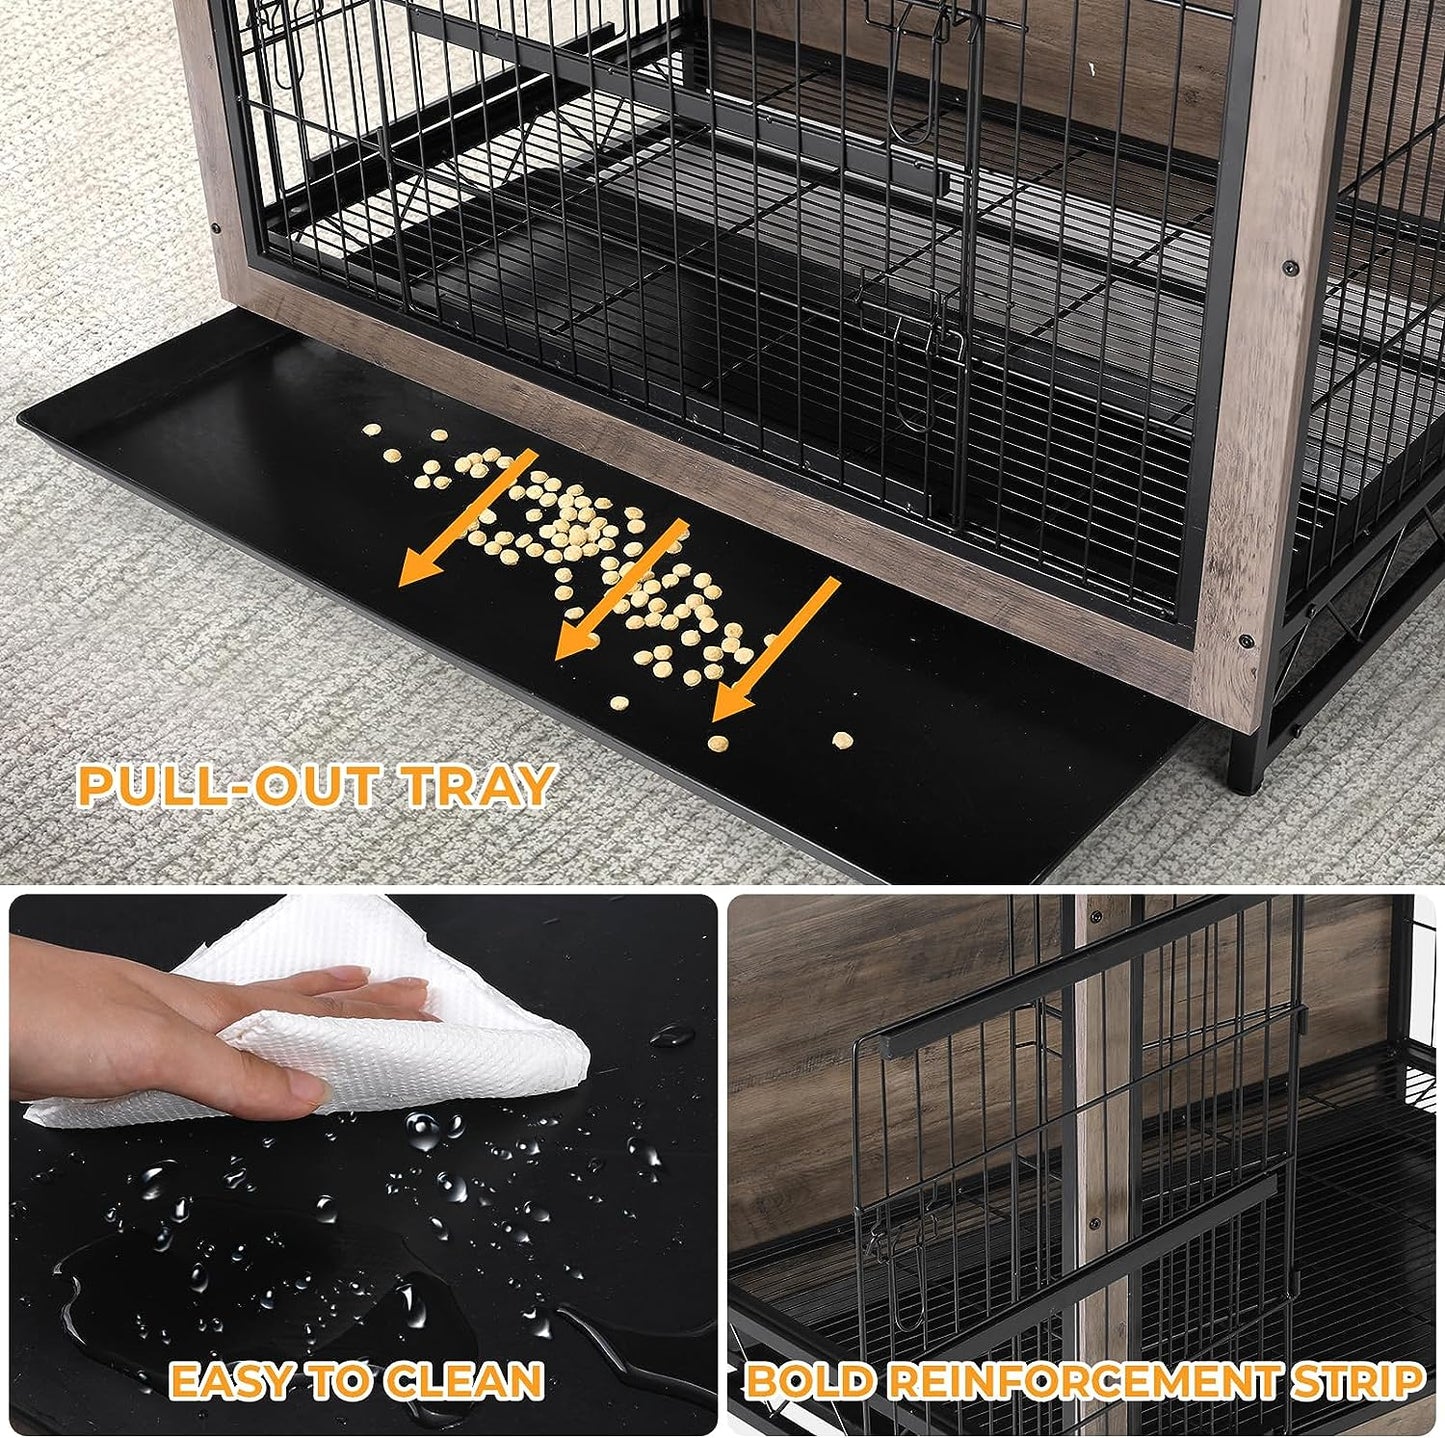 Arlopu 44.1’’ Dog Crate Furniture, Wooden Side End Table, Modern Dog Kennel with Double Doors, Heavy-Duty Dog Cage with Pull-Out Removable Tray, Indoor Medium/Large/Small Pet House Furniture